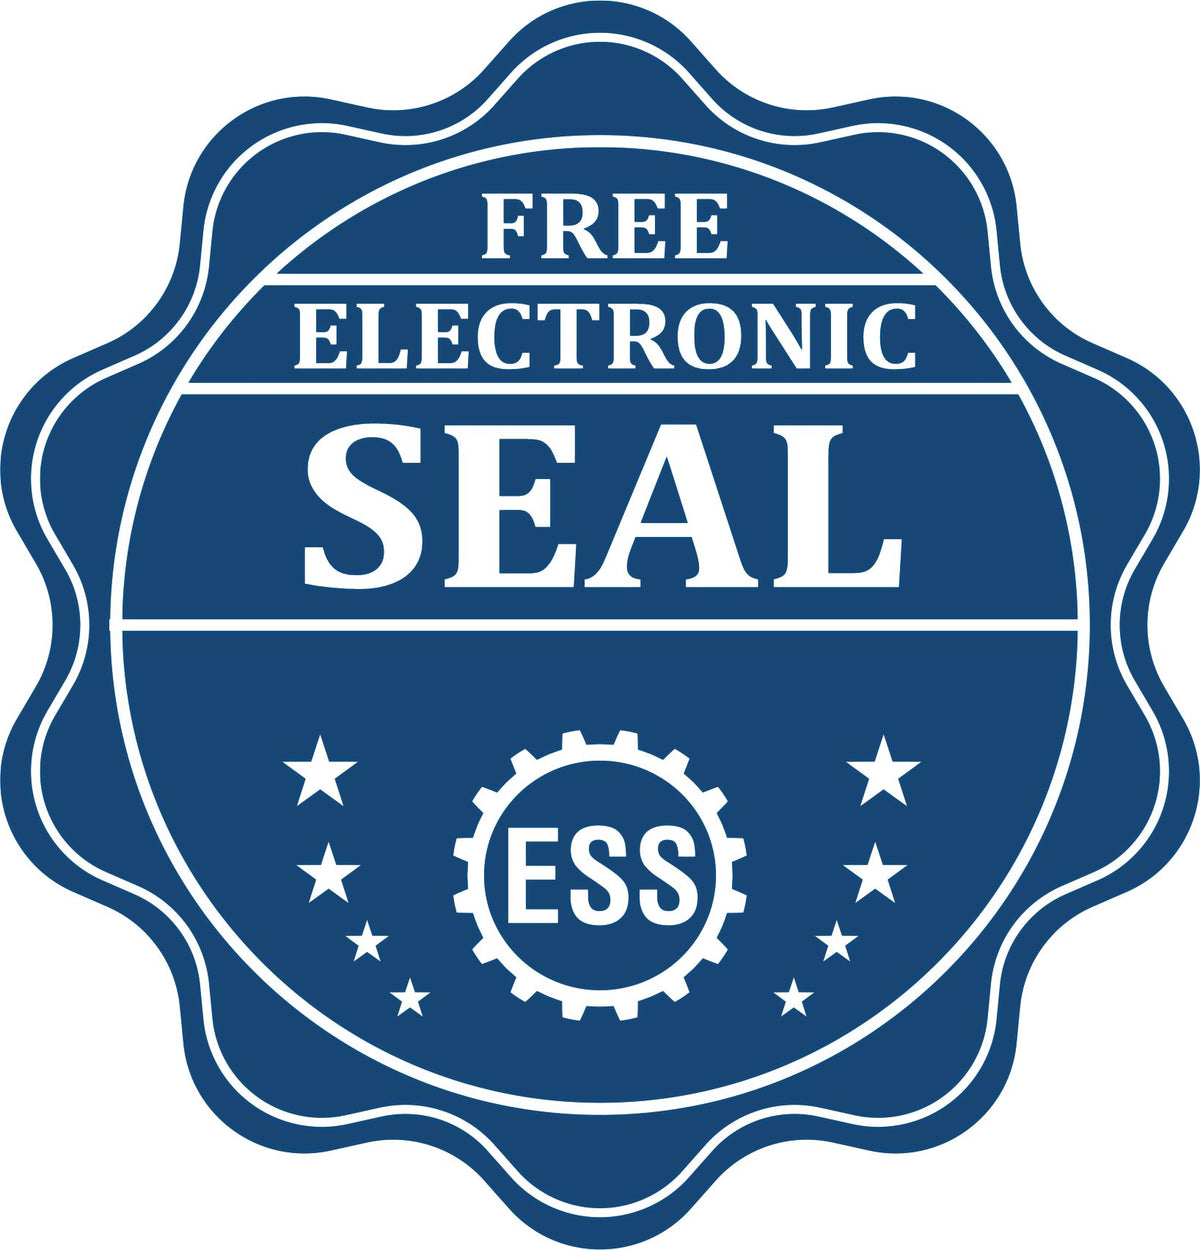 A badge showing a free electronic seal for the State of South Carolina Soft Land Surveyor Embossing Seal with stars and the ESS gear on the emblem.